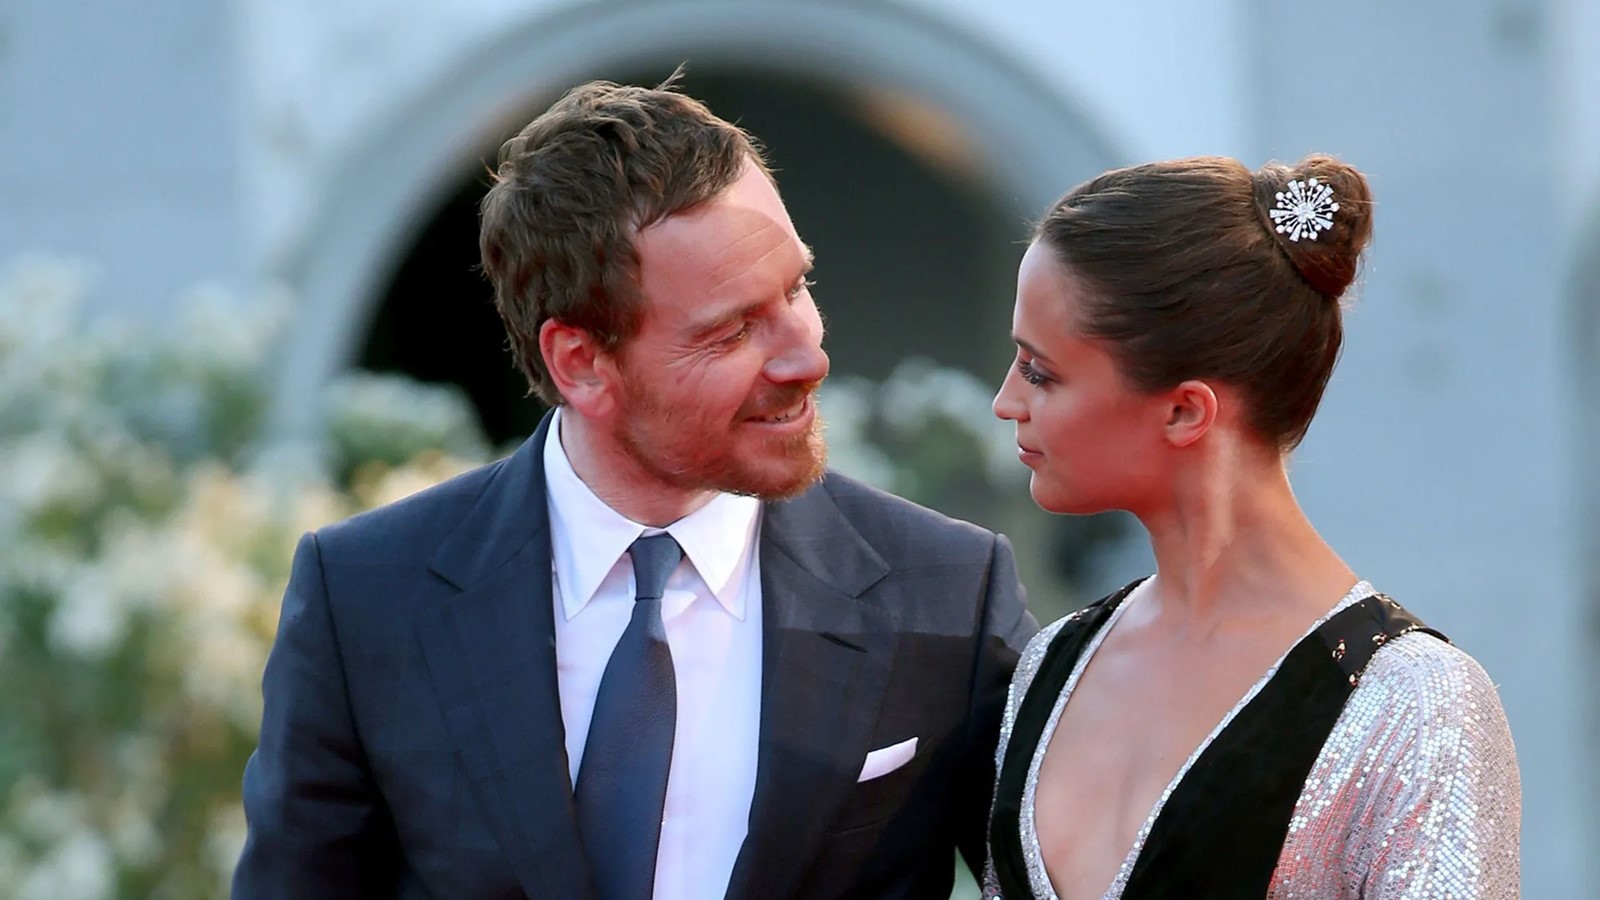 Alicia Vikander and Michael Fassbender will star together again in the film Hope